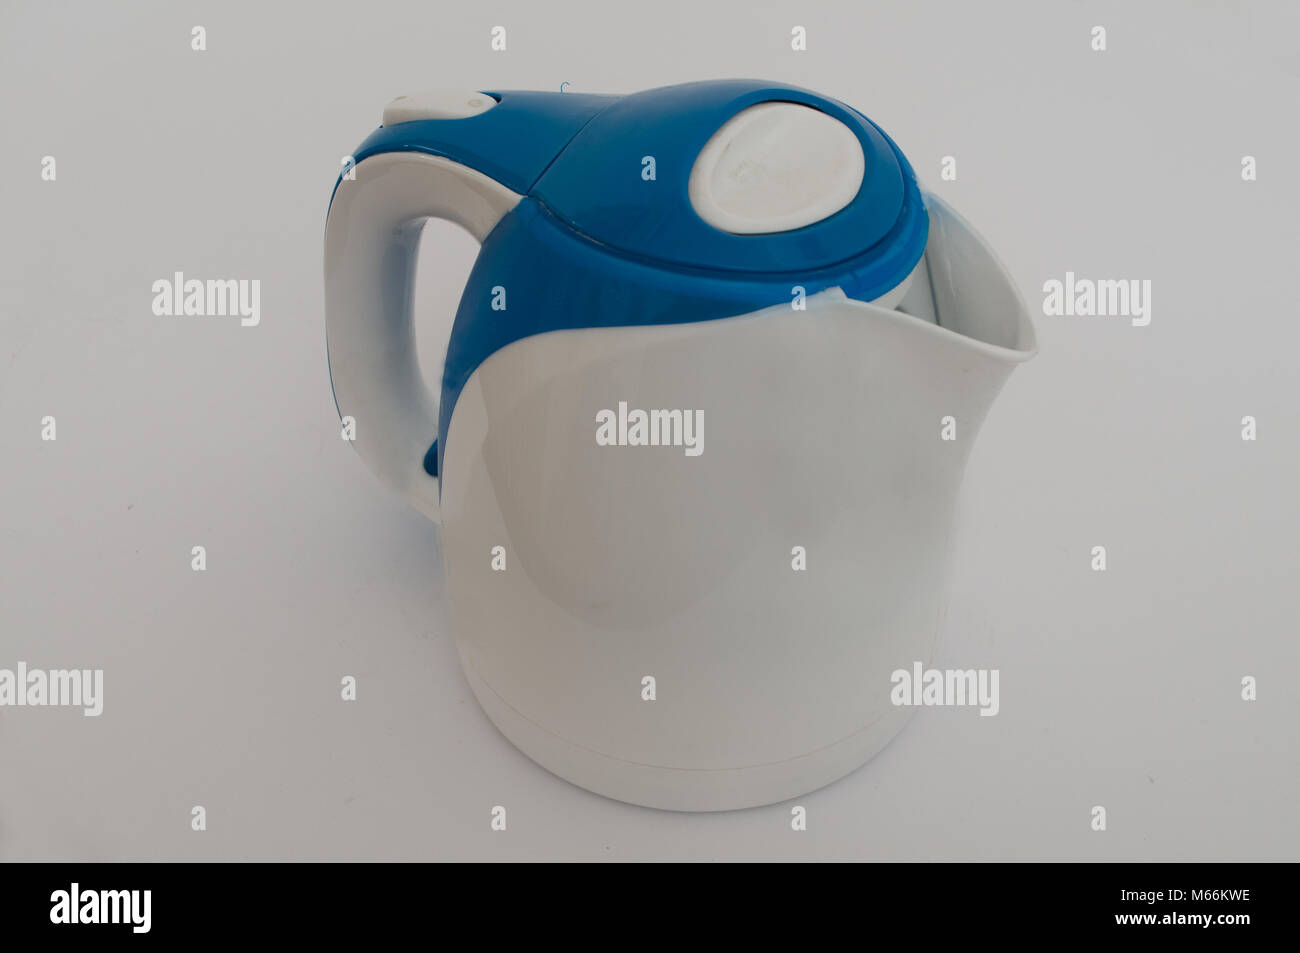 https://c8.alamy.com/comp/M66KWE/blue-and-white-electric-kettle-on-a-white-background-M66KWE.jpg